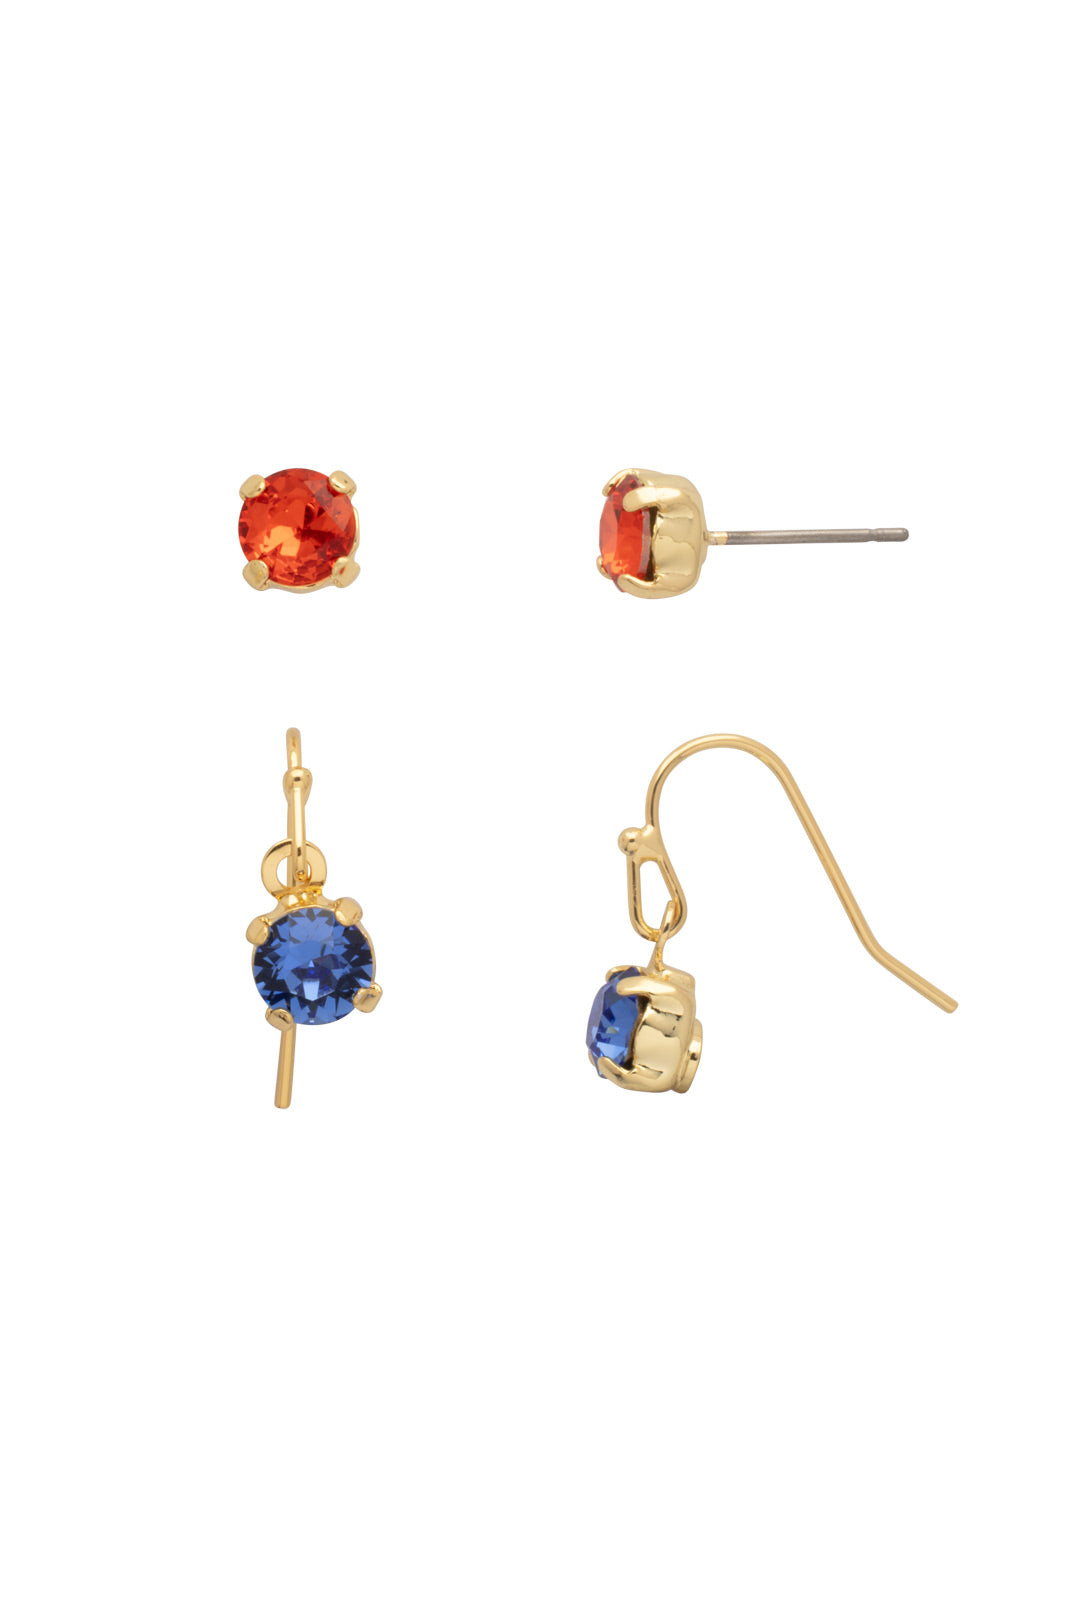 Jayda Set Dangle Earrings - EFM4BGOCR - <p>The Jayda Set Dangle Earrings include a pair of round-cut crystal studs and round-cut crystal dangle earrings, both dainty enough to wear together on the ear. From Sorrelli's Orange Crush collection in our Bright Gold-tone finish.</p>